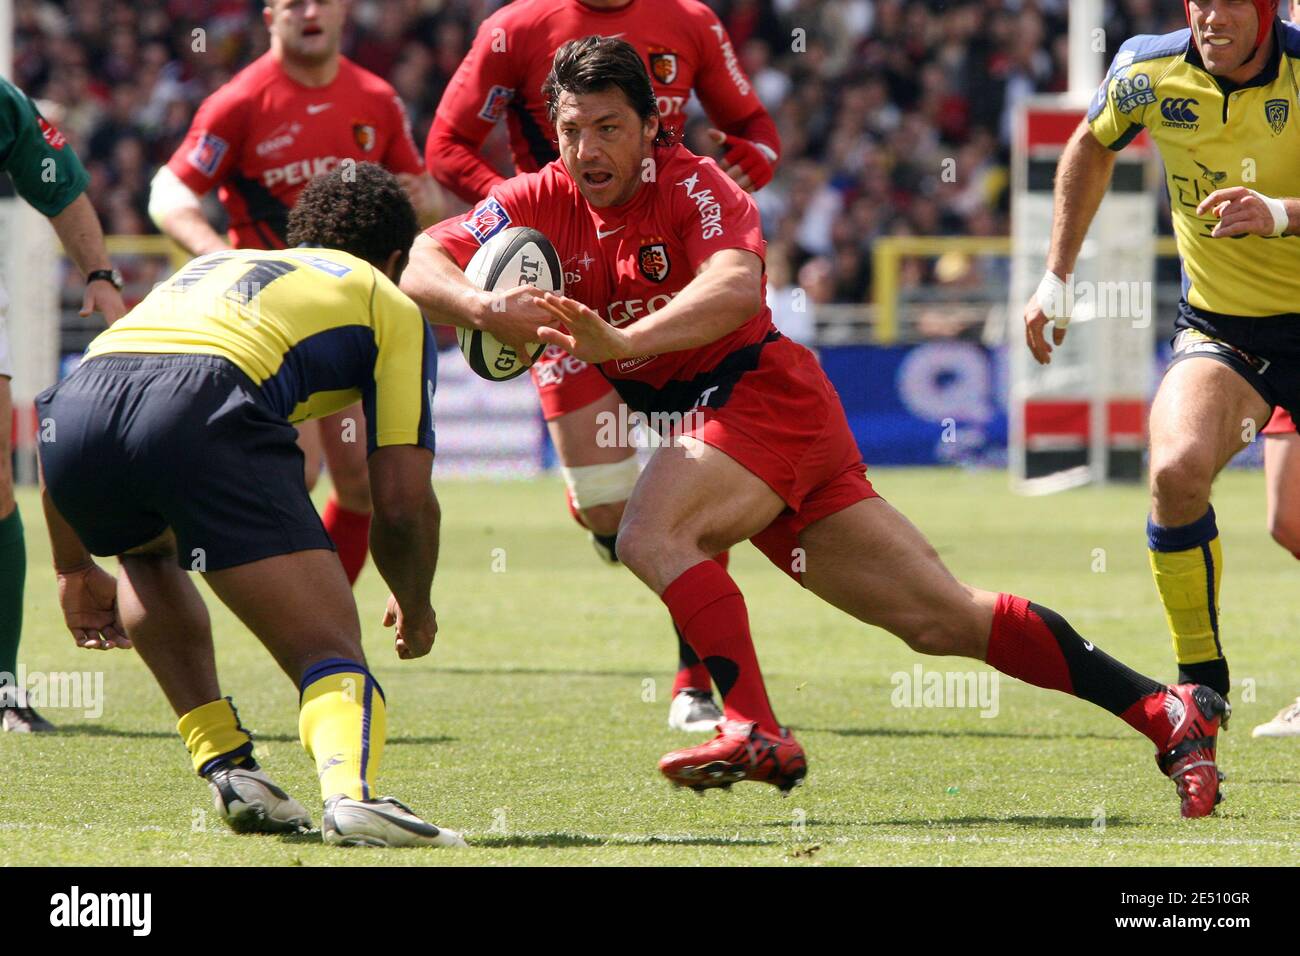 Toulouse's Byron Kelleher during the French Top 14 rugby union match  Toulouse vs Clermont-Ferrand at the Stadium in Toulouse, France on April  19, 2008. Clermont put themselves in pole position to finish